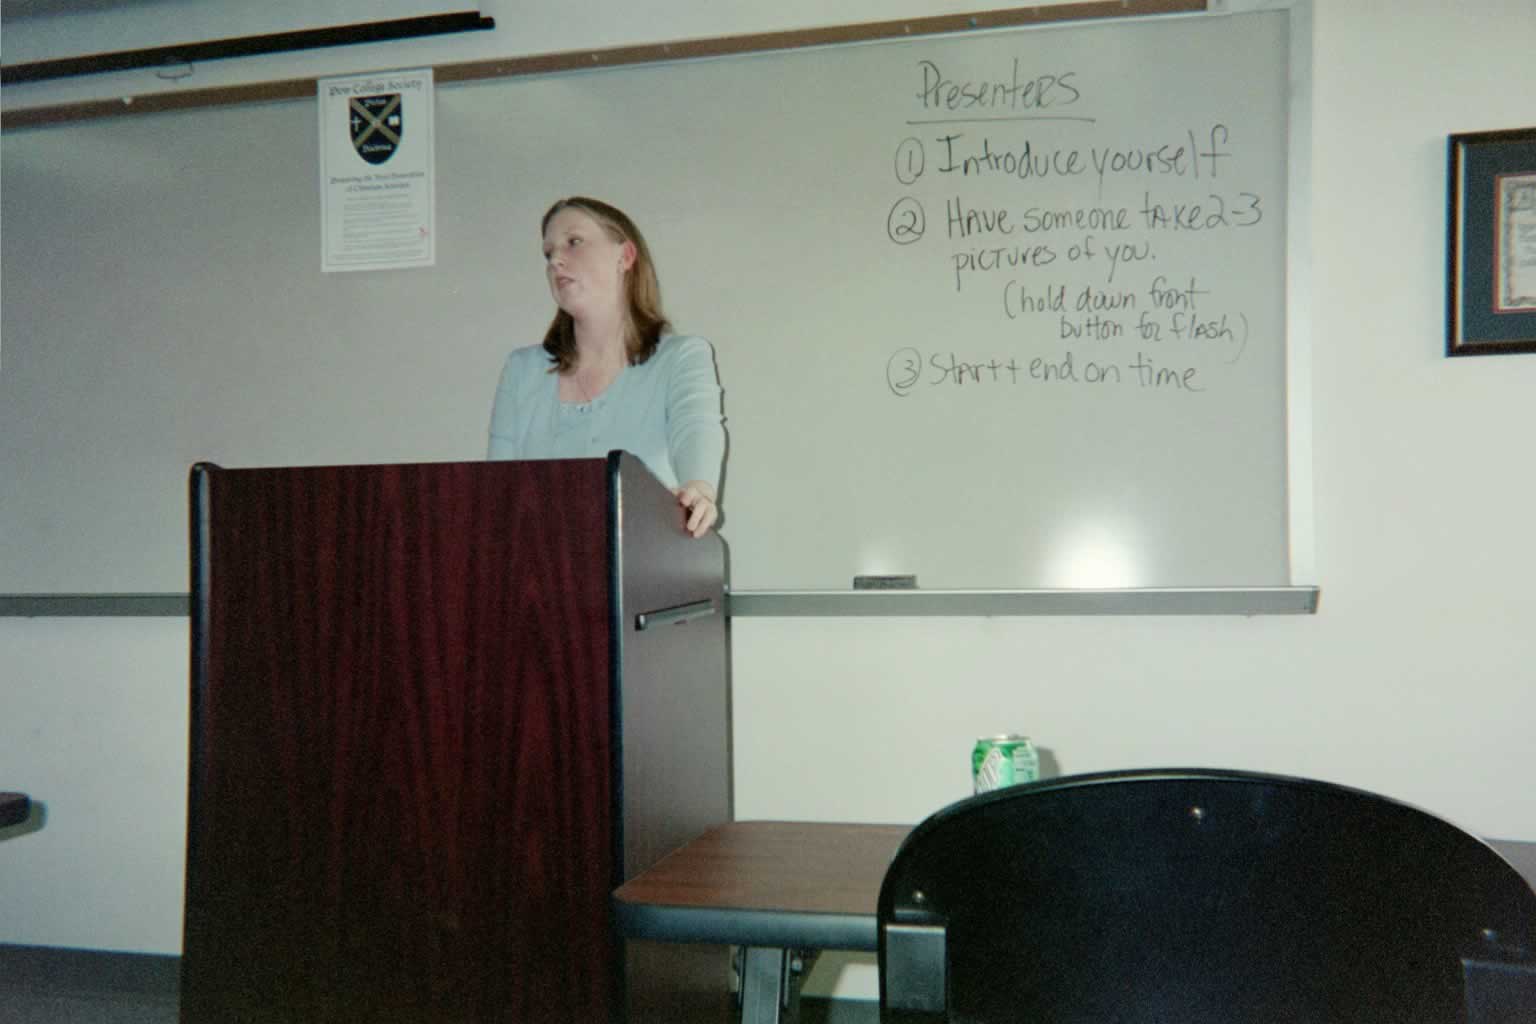 picture of a woman standing behind a podium tilting her head to the side